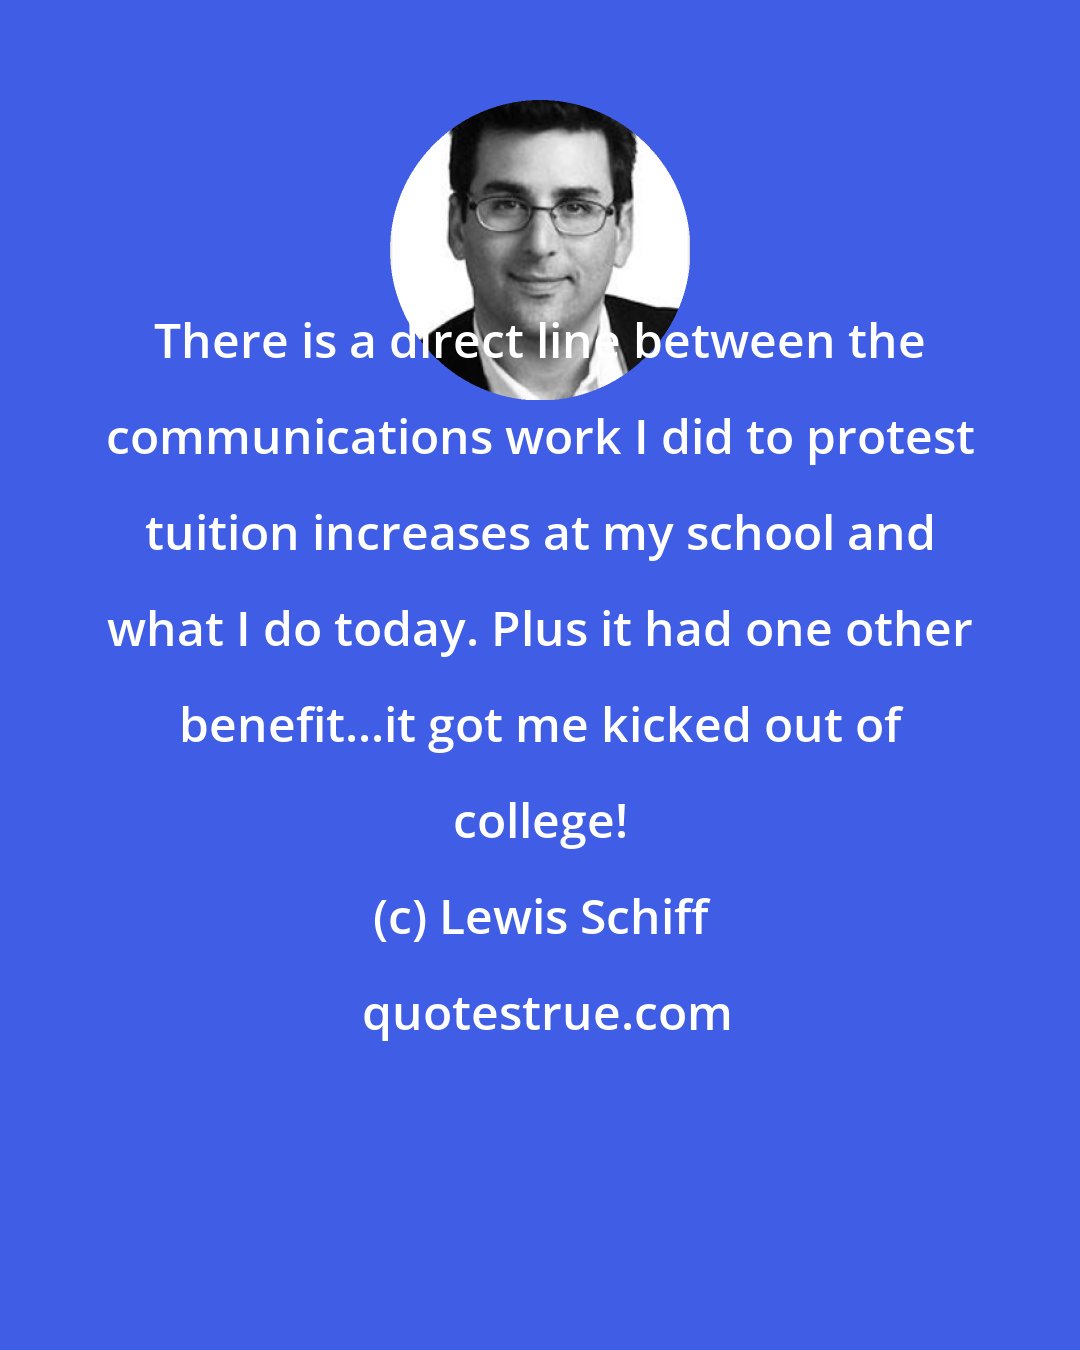 Lewis Schiff: There is a direct line between the communications work I did to protest tuition increases at my school and what I do today. Plus it had one other benefit...it got me kicked out of college!